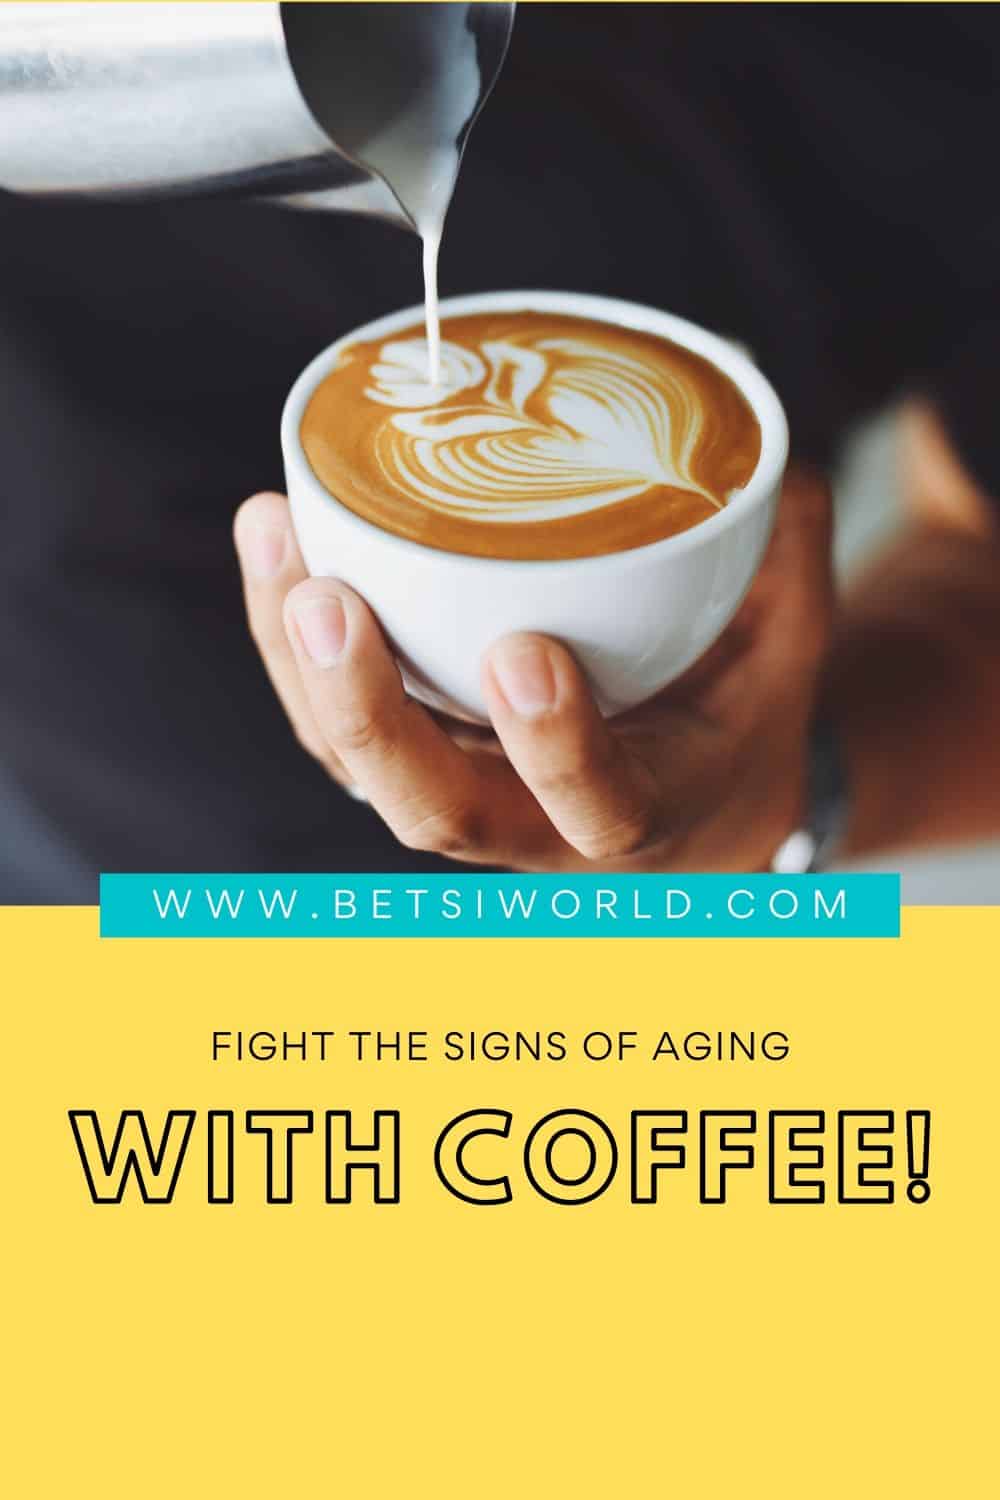 Many of us long for the first cup of coffee in the morning to help jump start our day. Coffee, or actually the caffeine in coffee is a a natural way to fight aging. So next time you pick up that delicious cup of coffee, remember you are fighting aging!